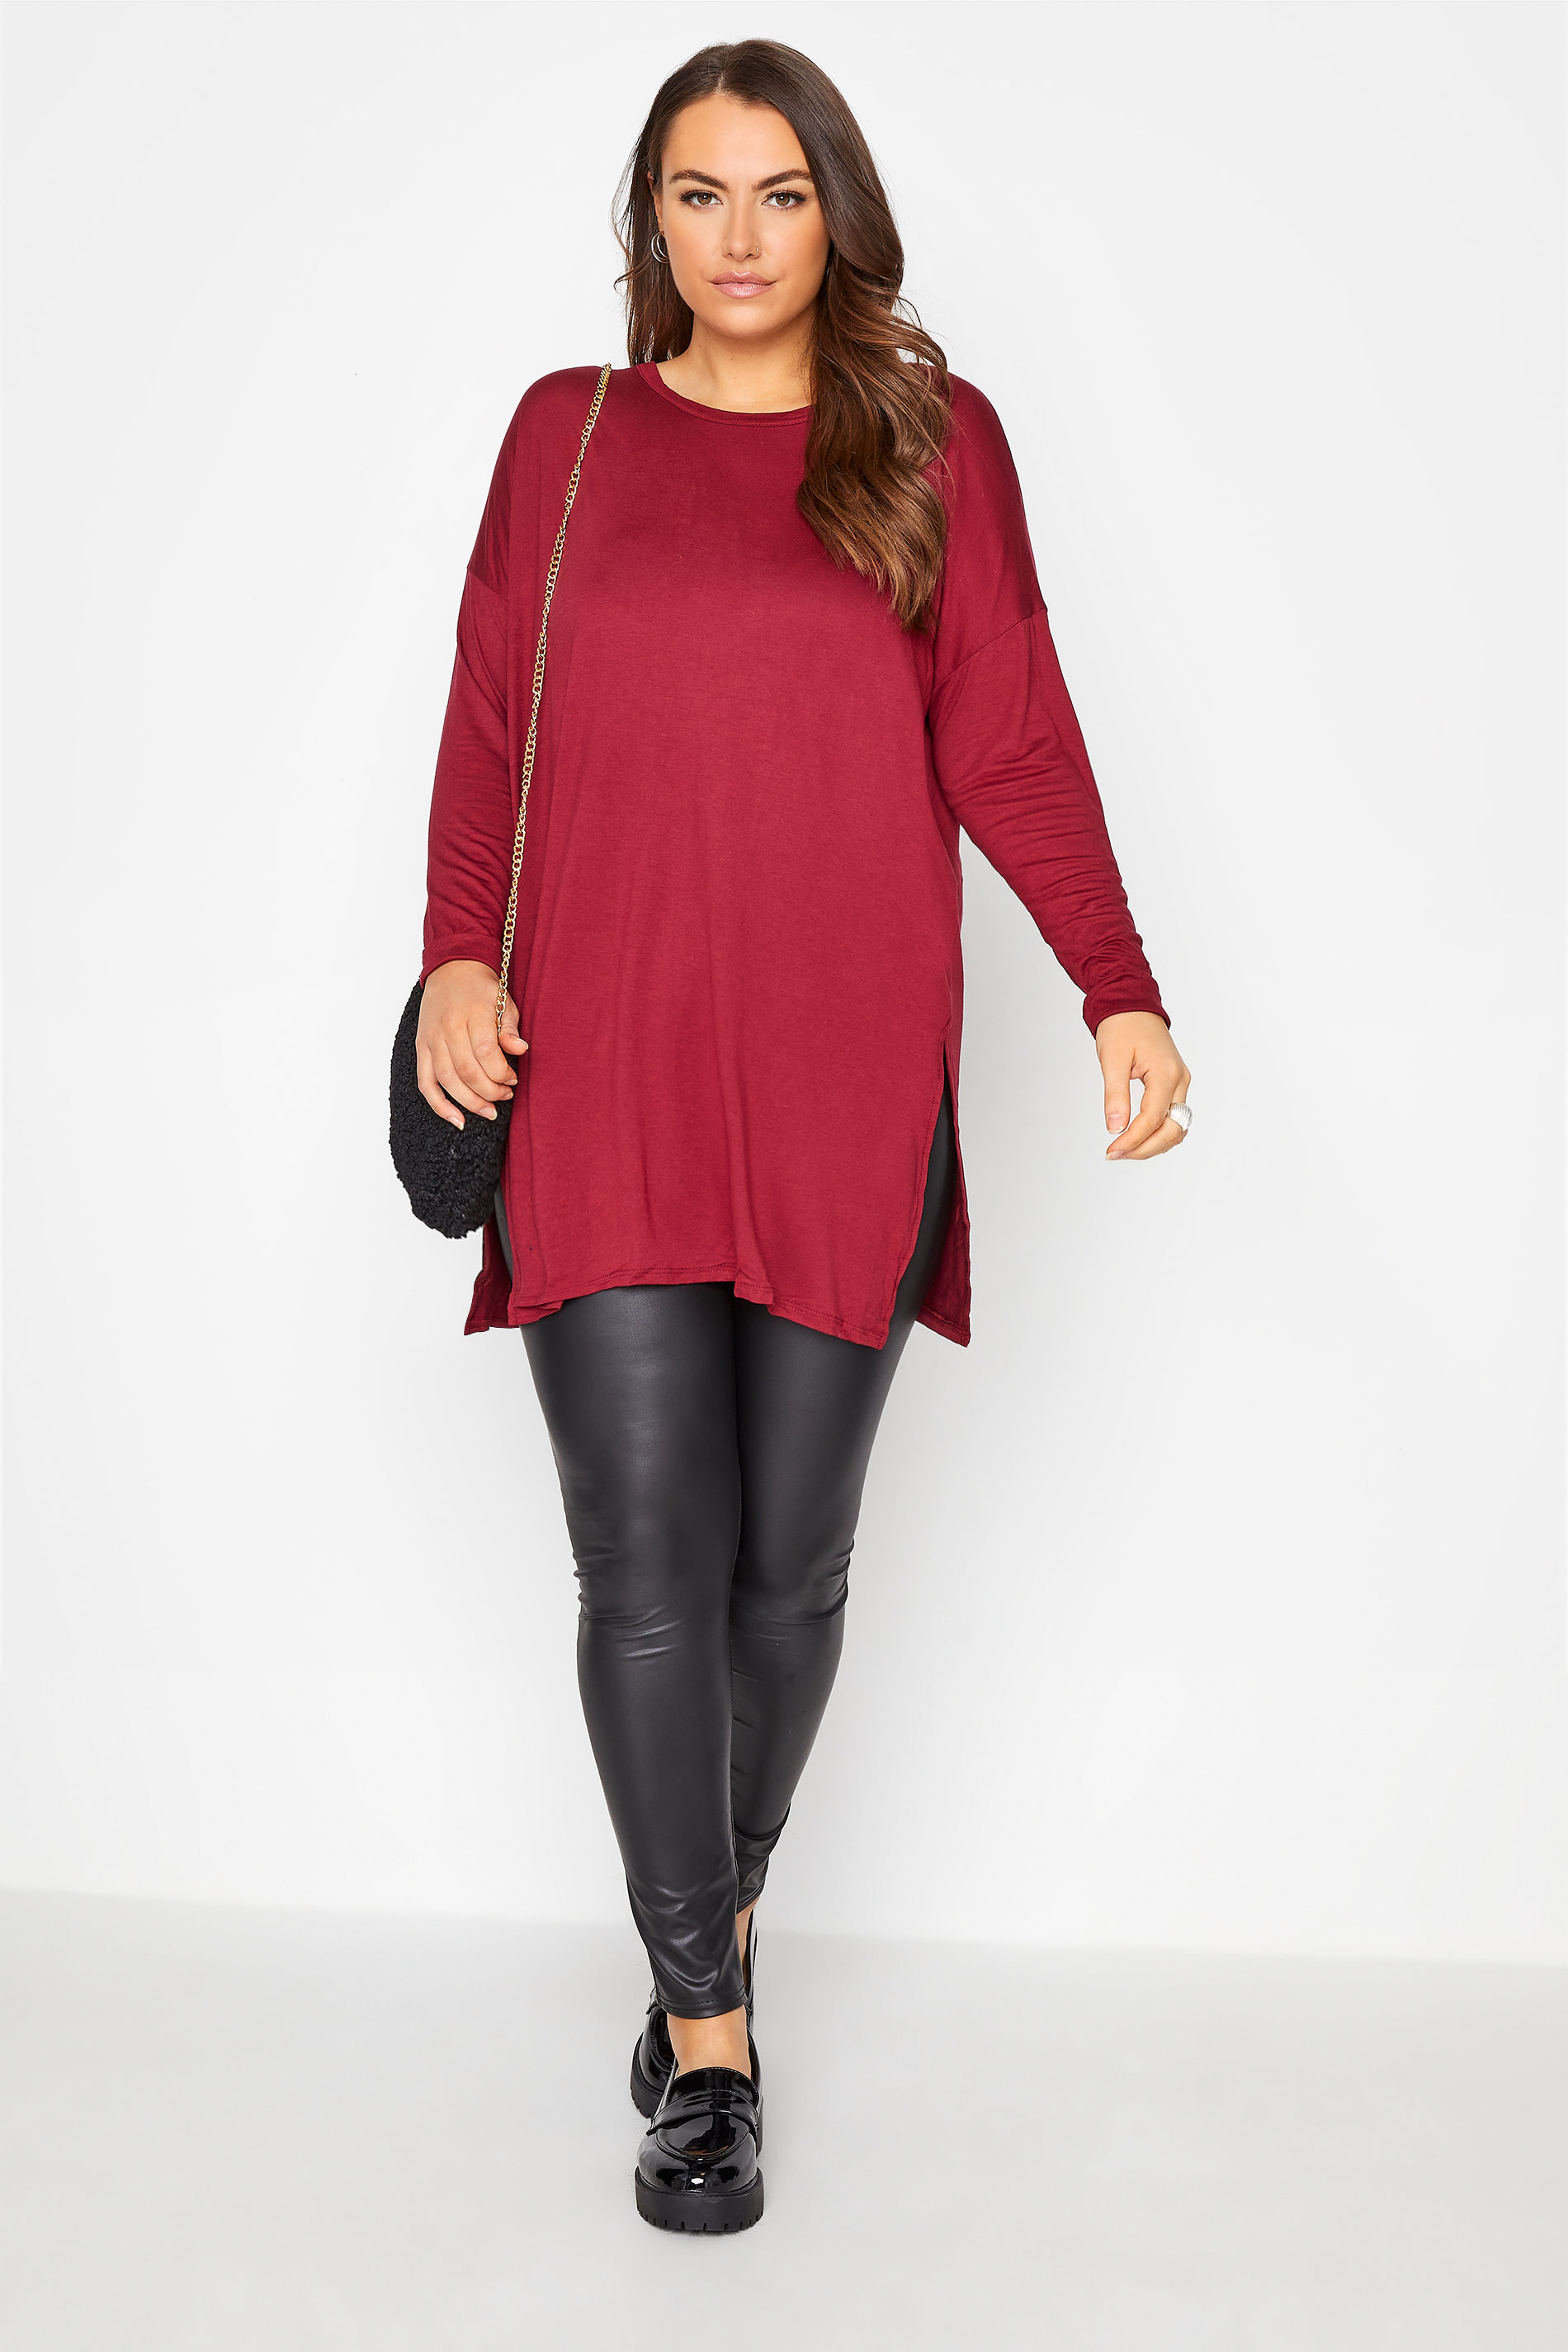 Grande taille  Tops Grande taille  Tops à Manches Longues | T-Shirt Rouge Vin Long Style Oversize - HL07991